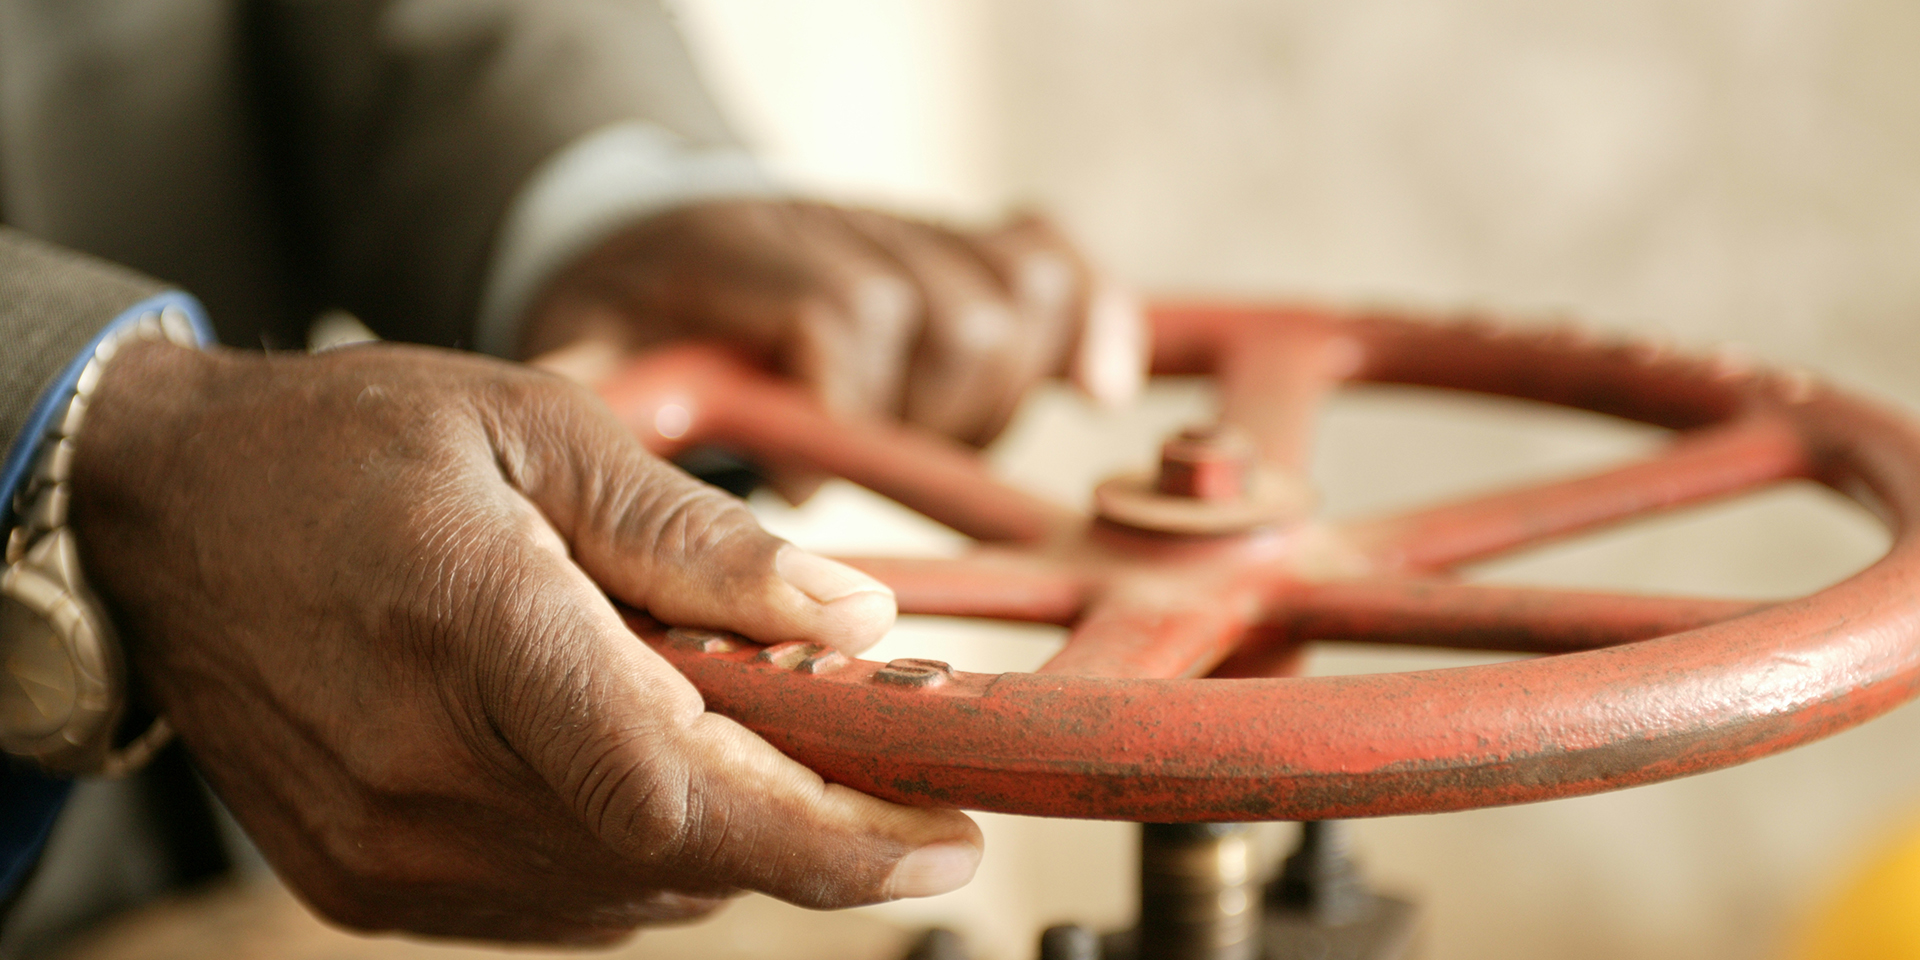 A close-up of hands turning a large, red valve.